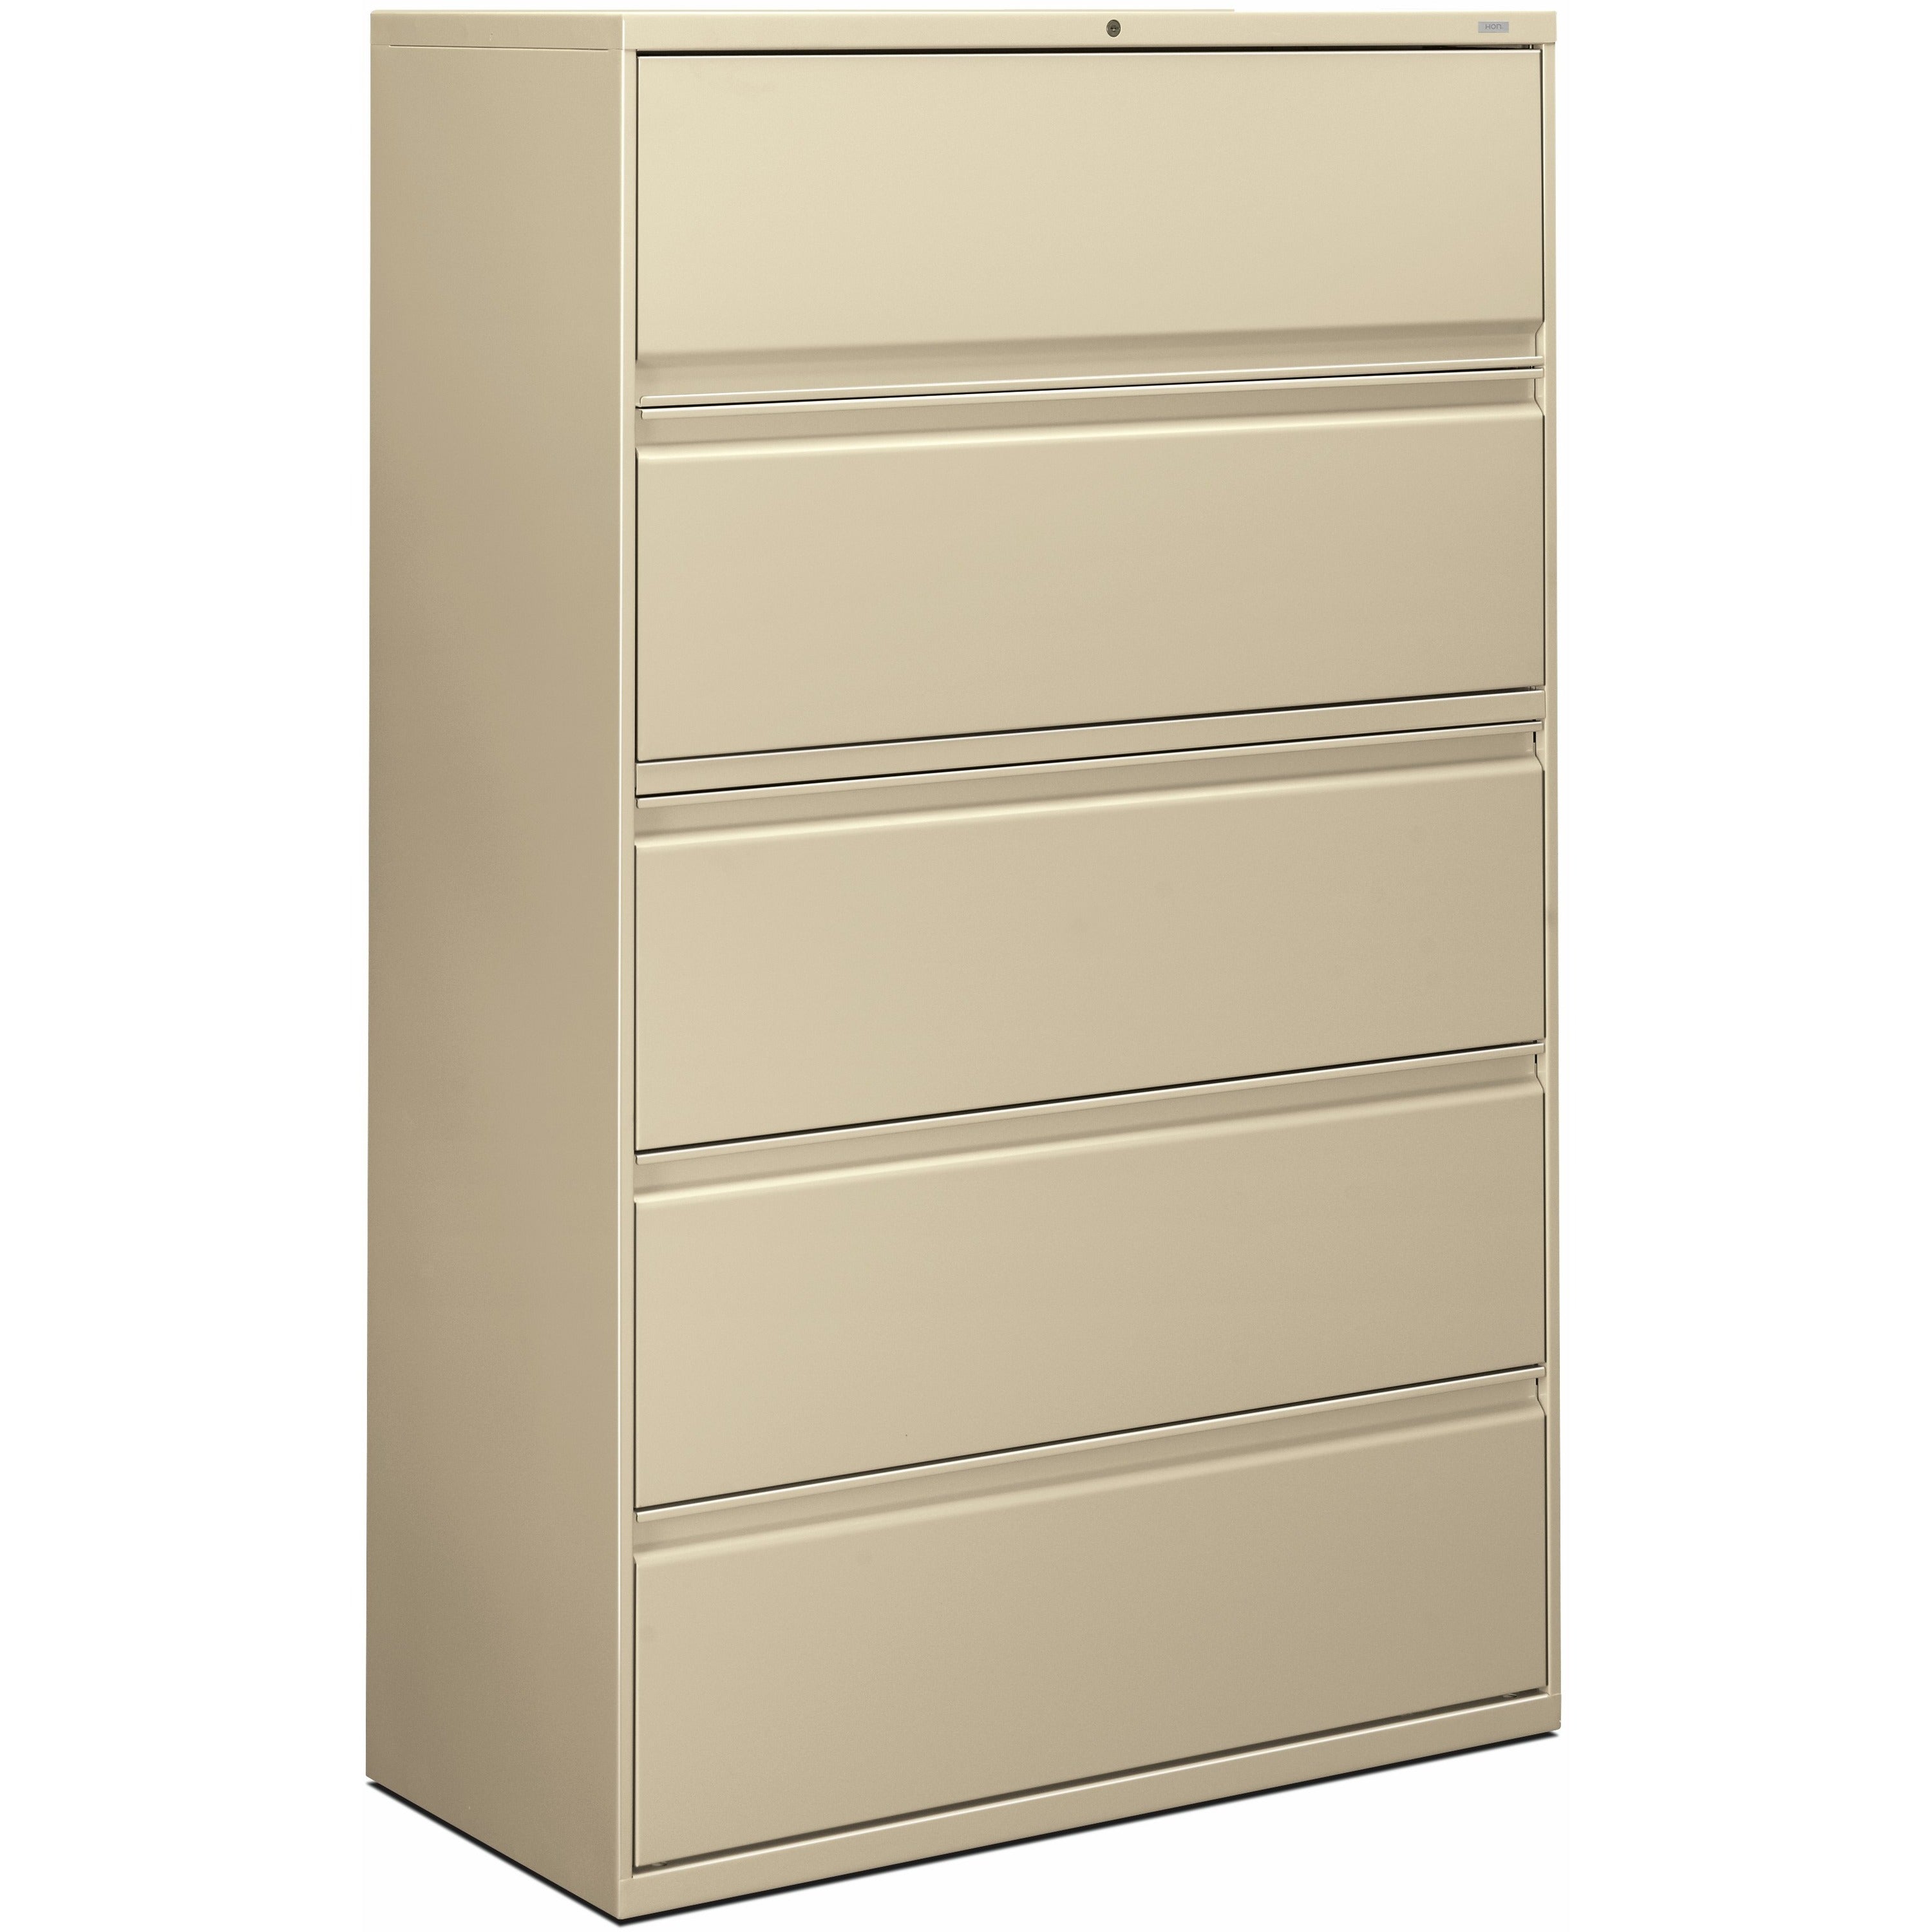 HON Brigade 800 H895 Lateral File - 42" x 18"67" - 5 Drawer(s) - Finish: Putty - 